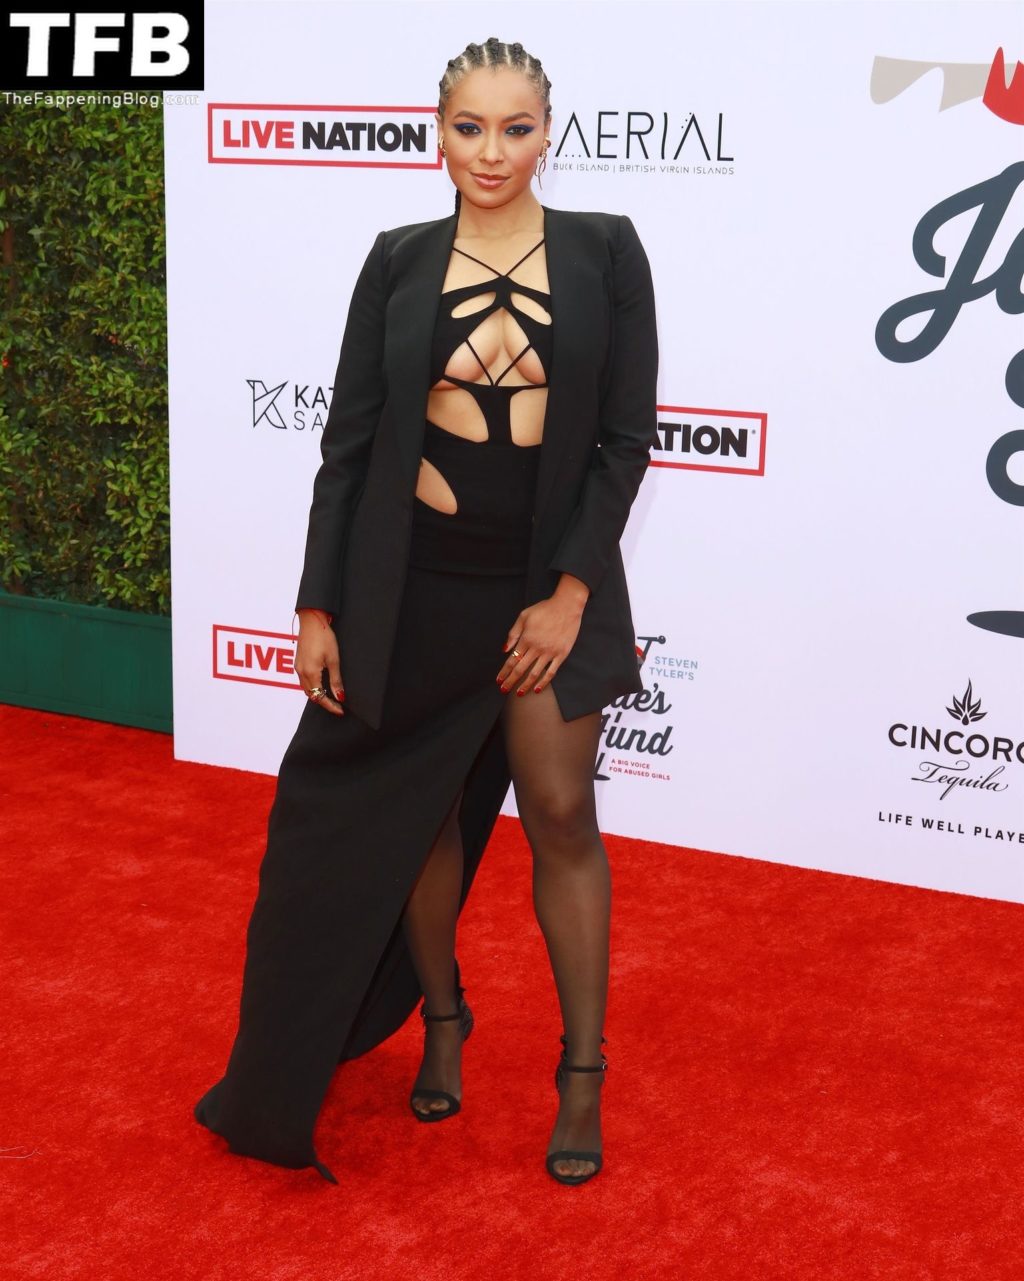 Kat Graham Tits The Fappening Blog 6 1024x1281 - Kat Graham Displays Her Underboob at the 4th Annual Grammy Awards Viewing Party (13 Photos)